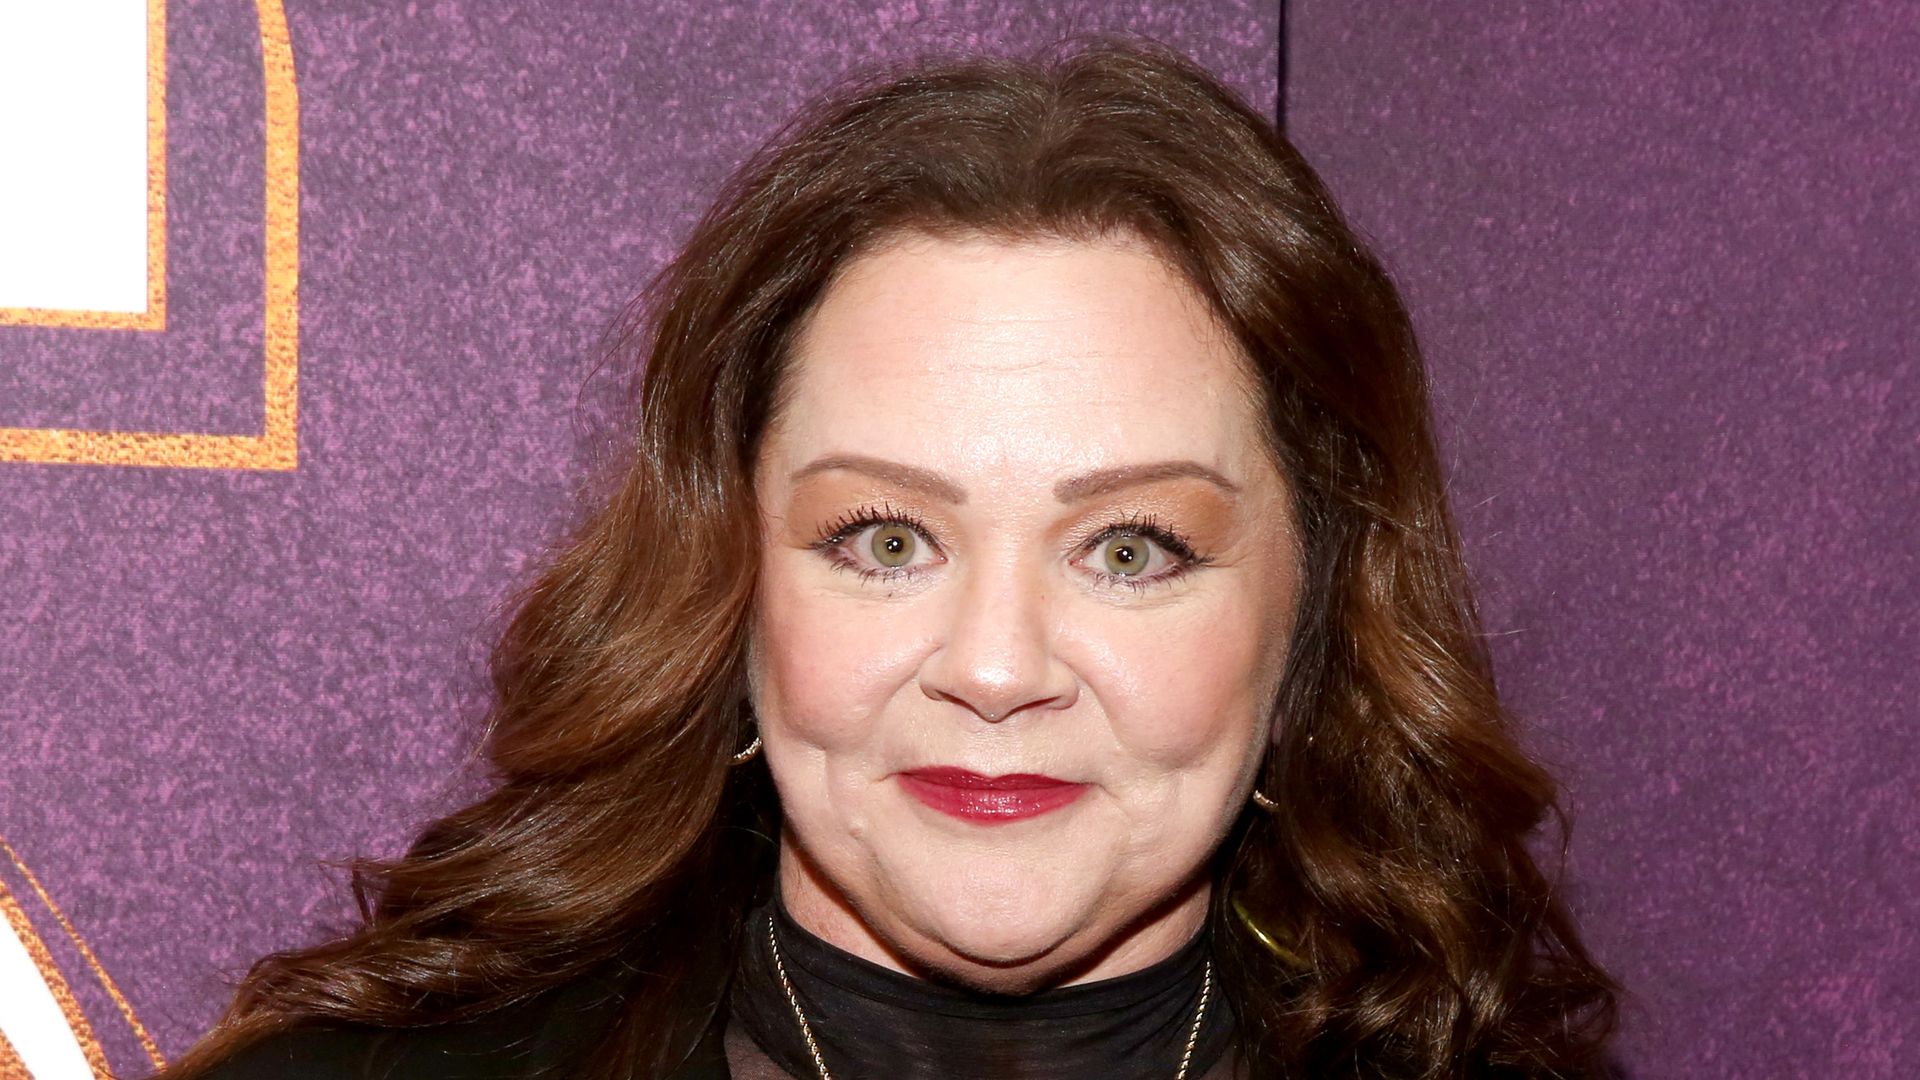 Melissa McCarthy displays slim waist in see-through top after 75lbs weight loss